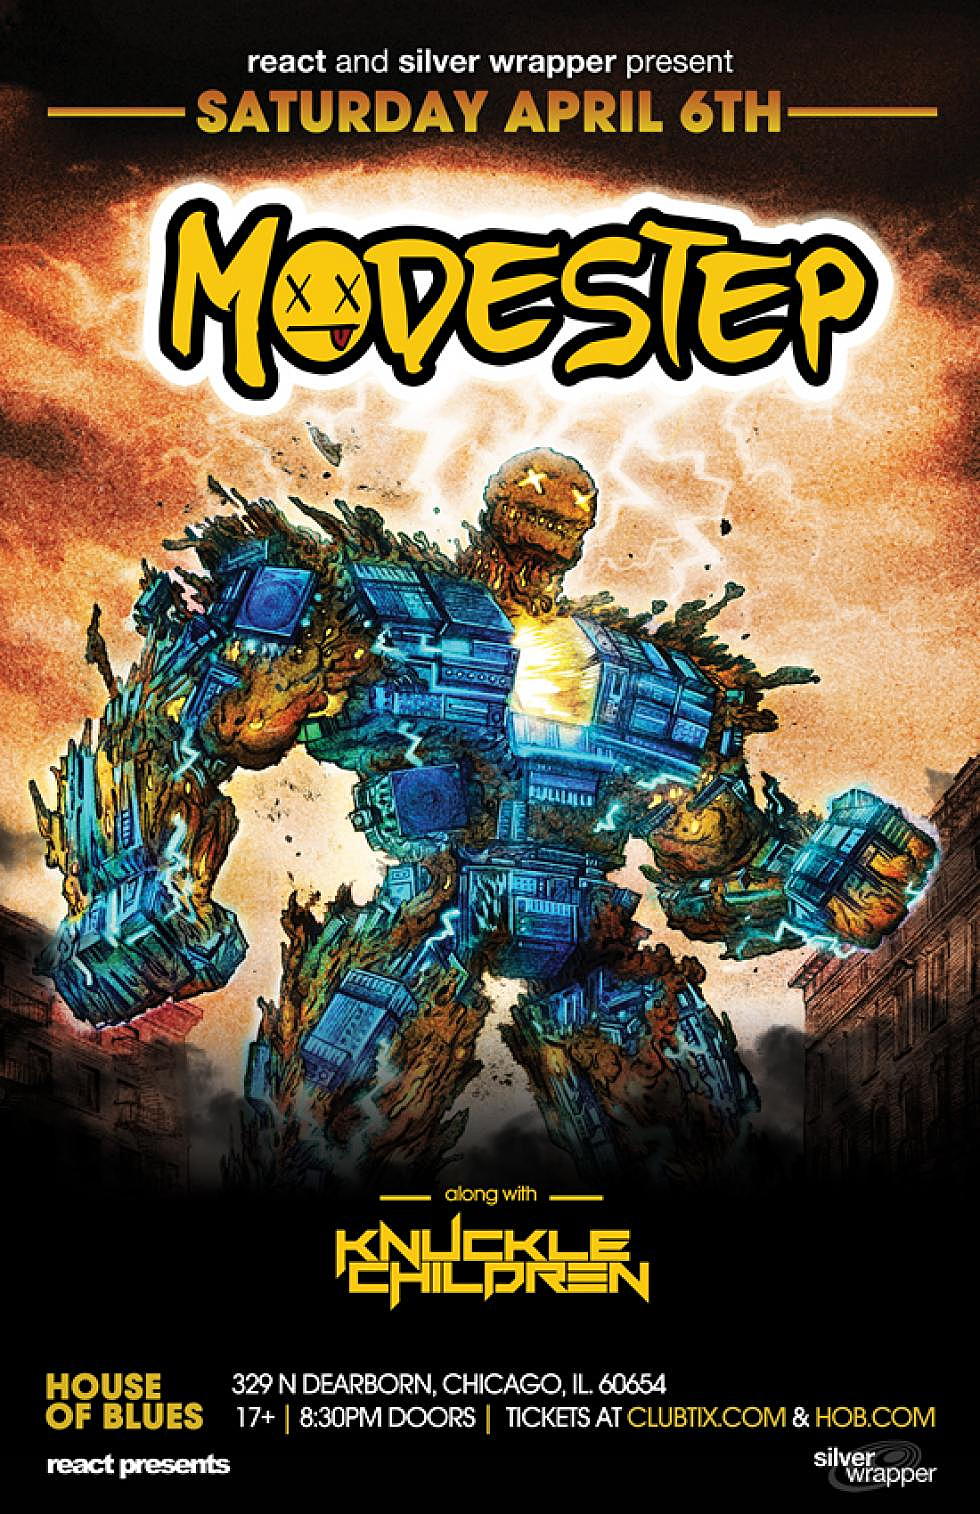 Modestep at House of Blues Chicago April 6th